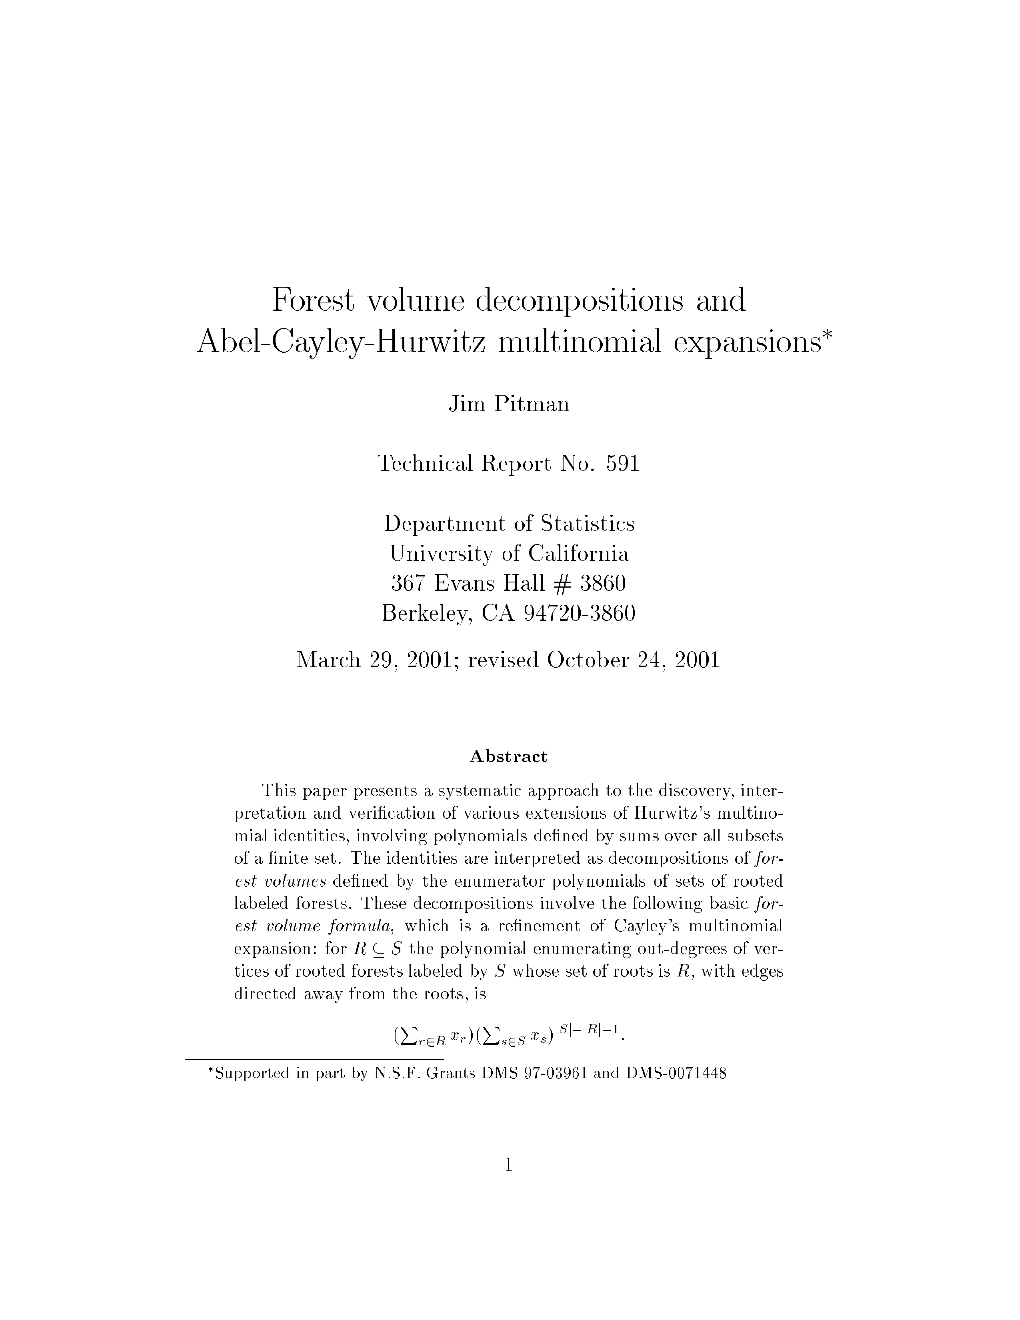 Forest Volume Decompositions and Abel-Cayley-Hurwitz Multinomial